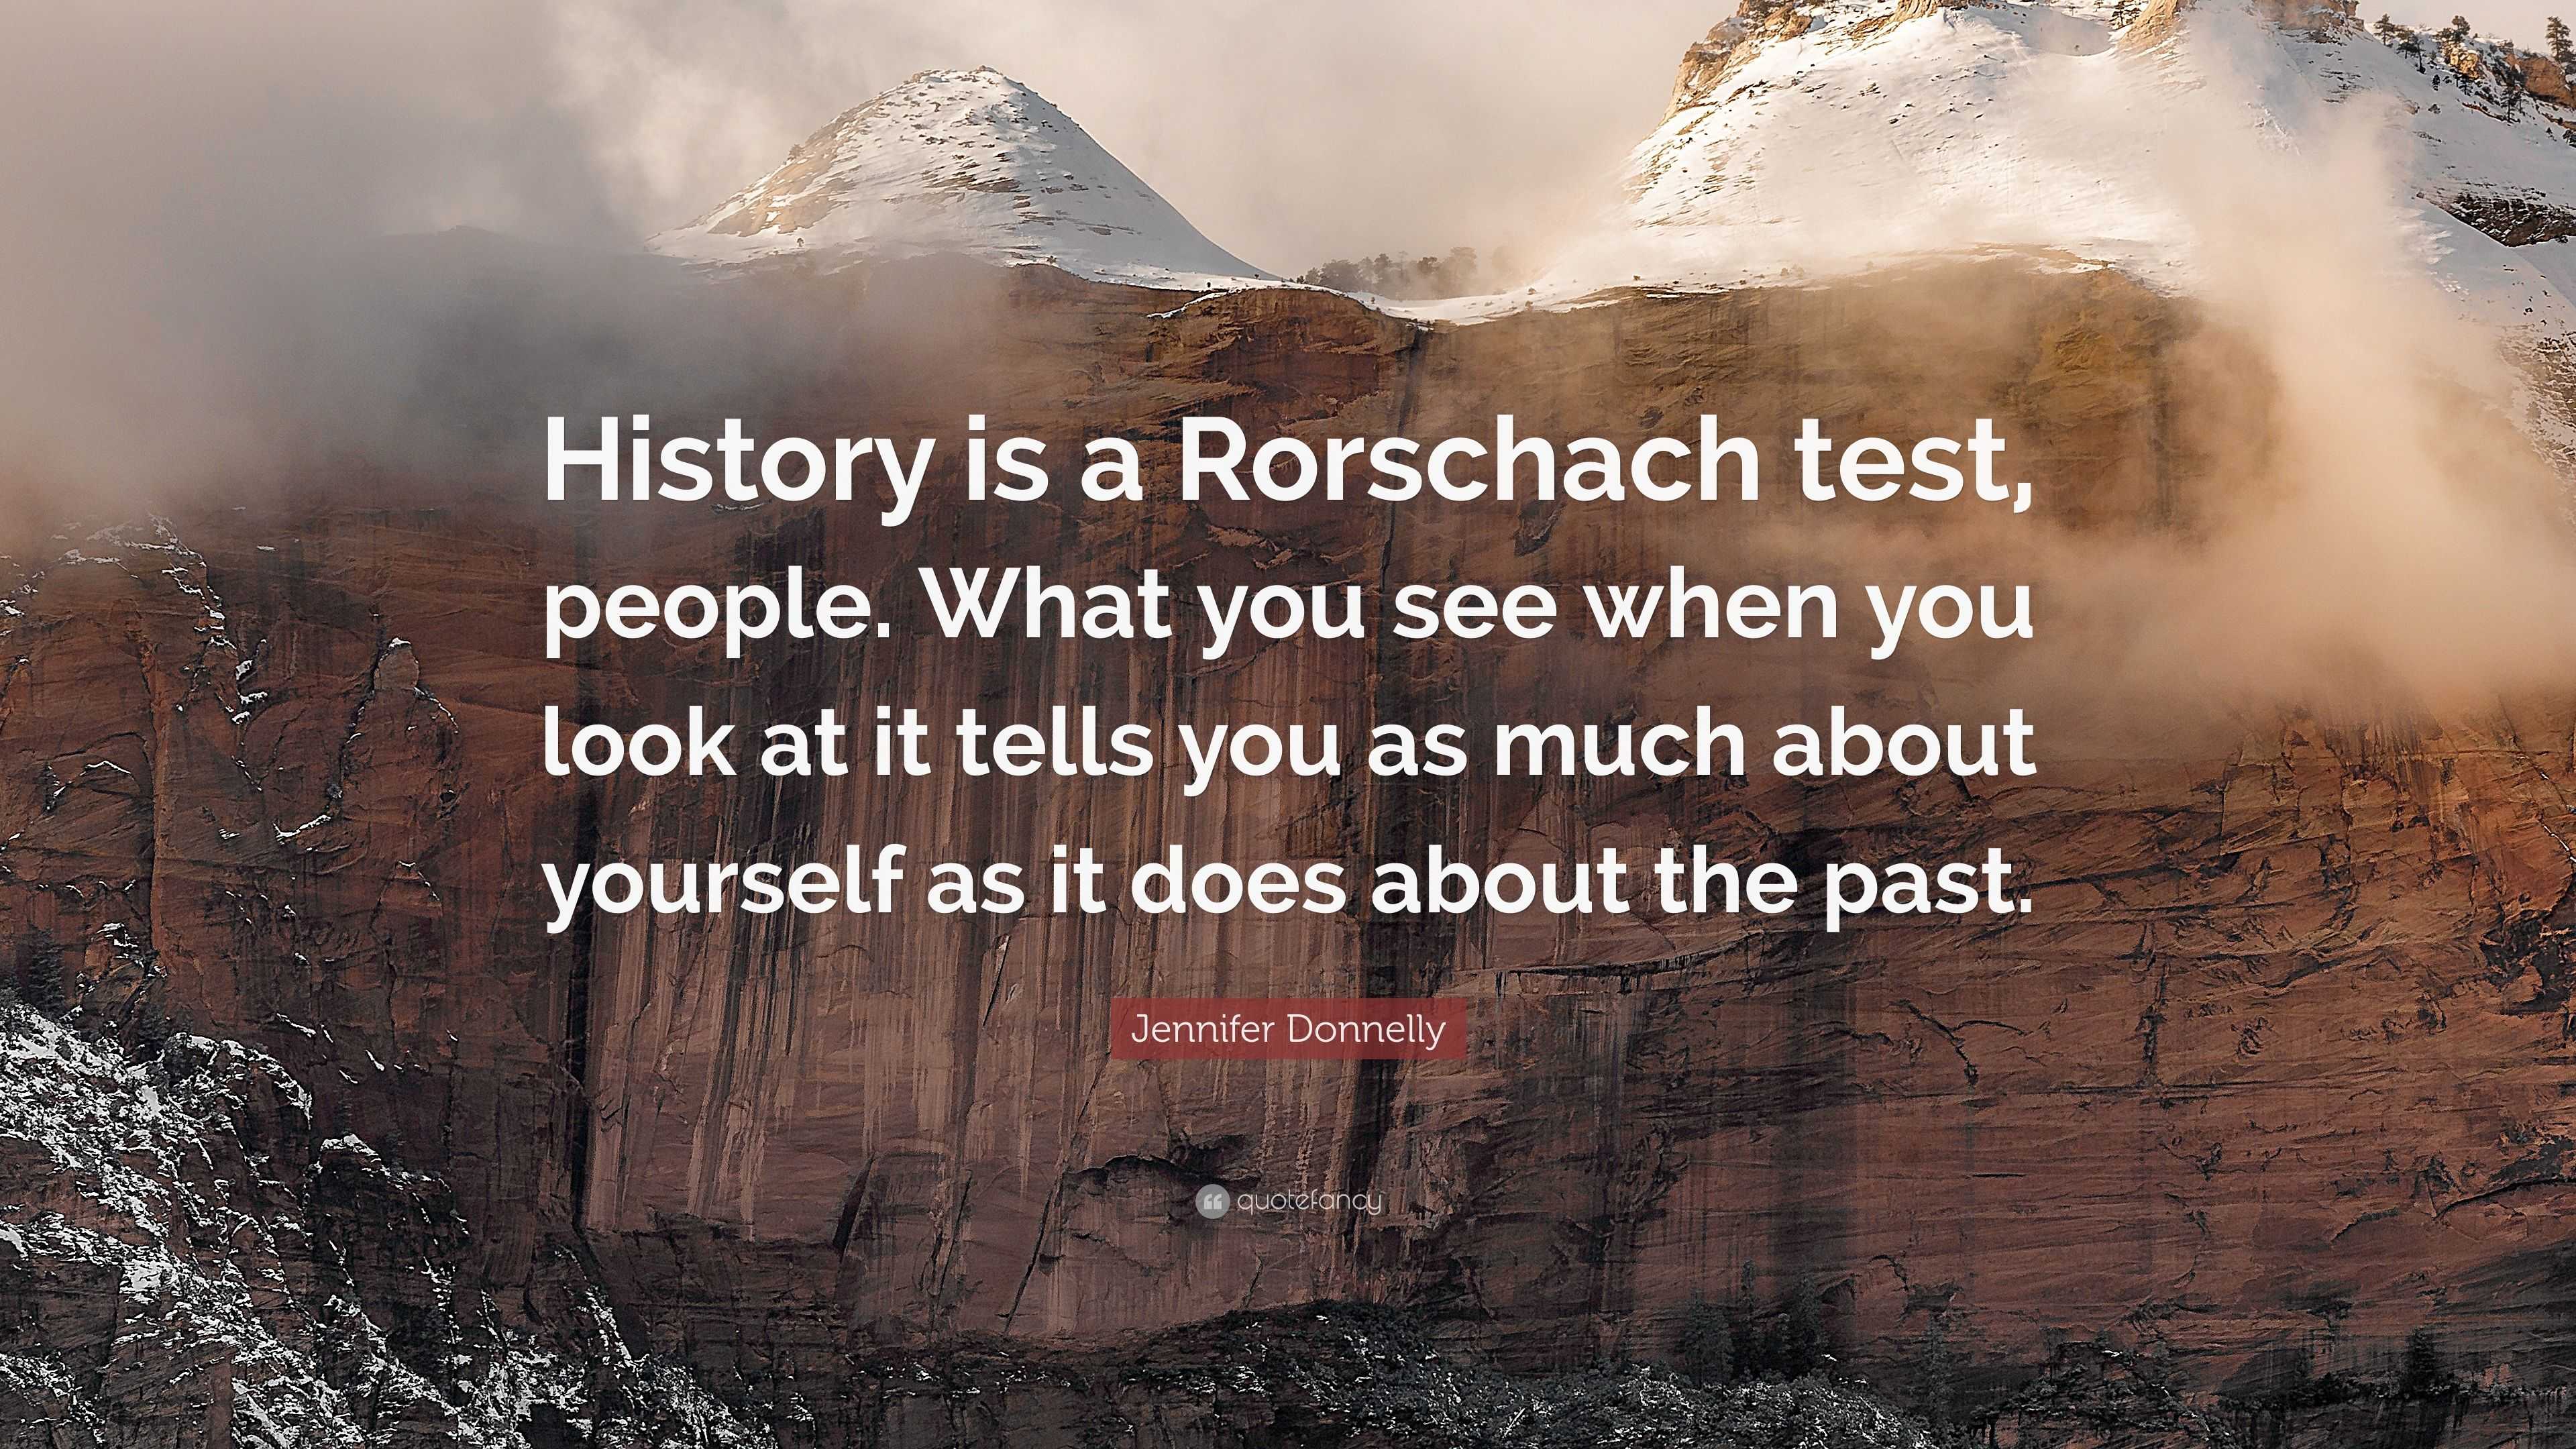 history of the rorschach test